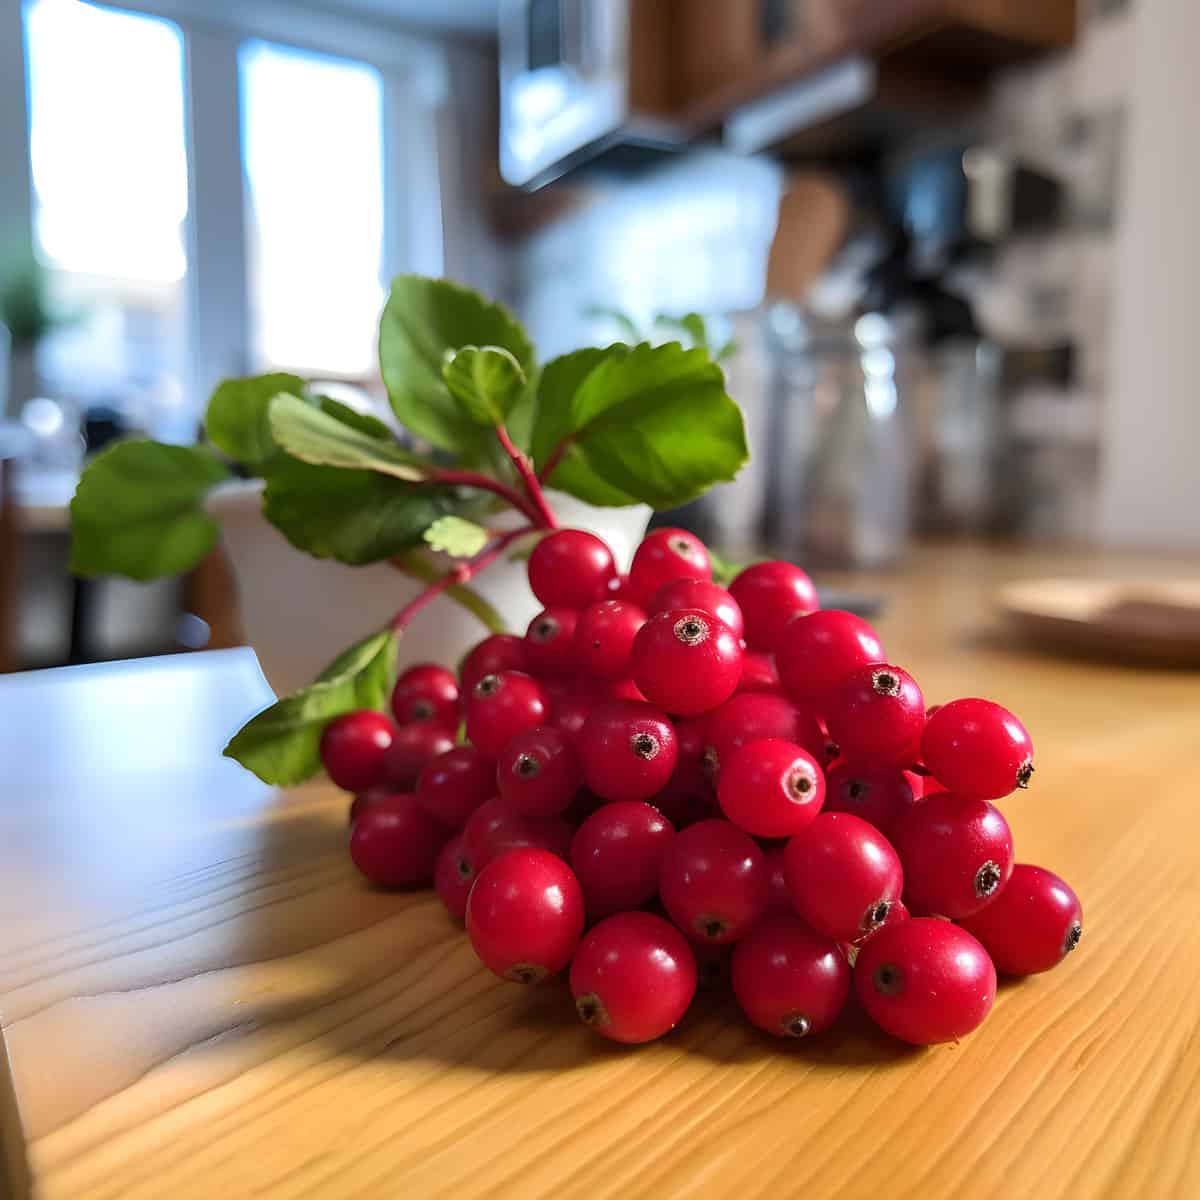 Partridgeberry on a kitchen counter